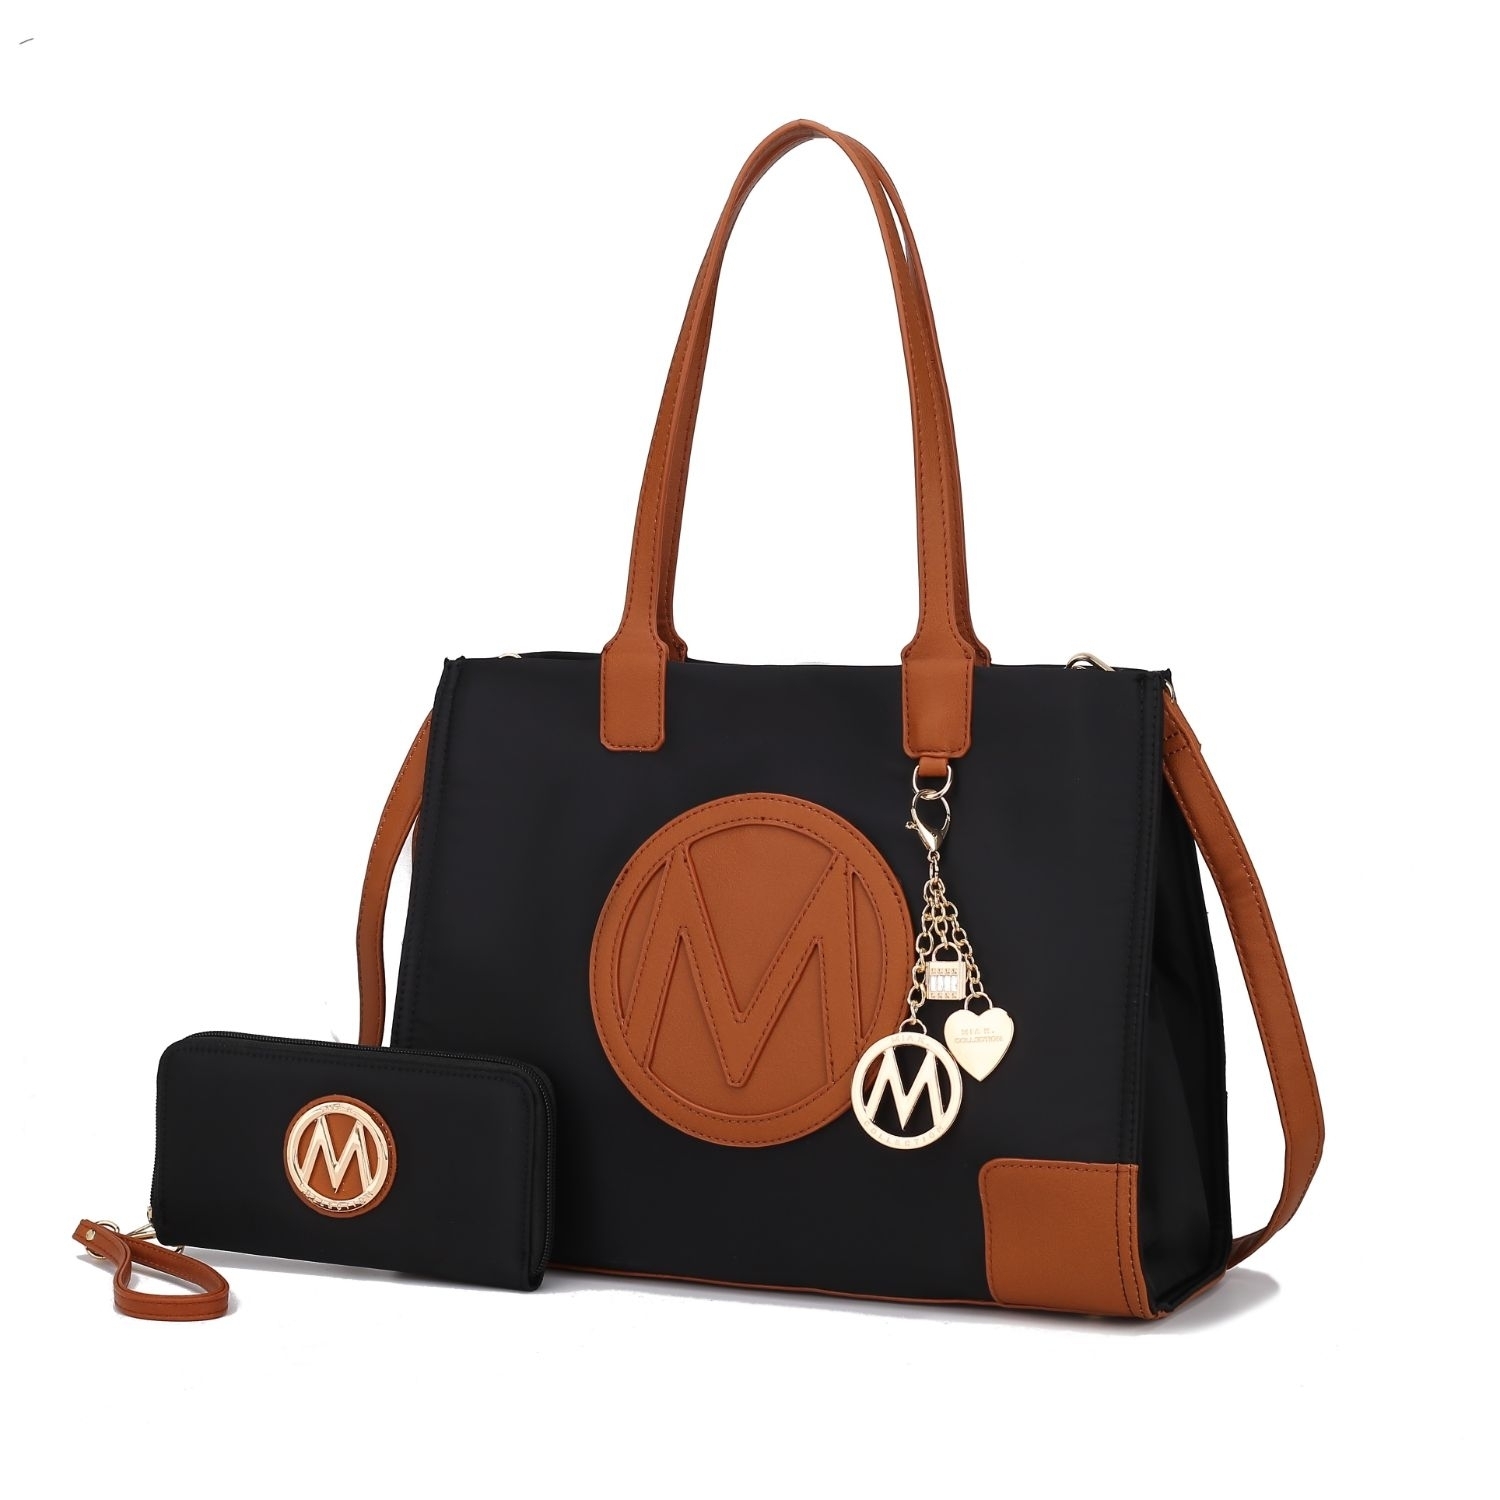 MKF Collection Louise Tote Handbag And Wallet Set By Mia K. - Black